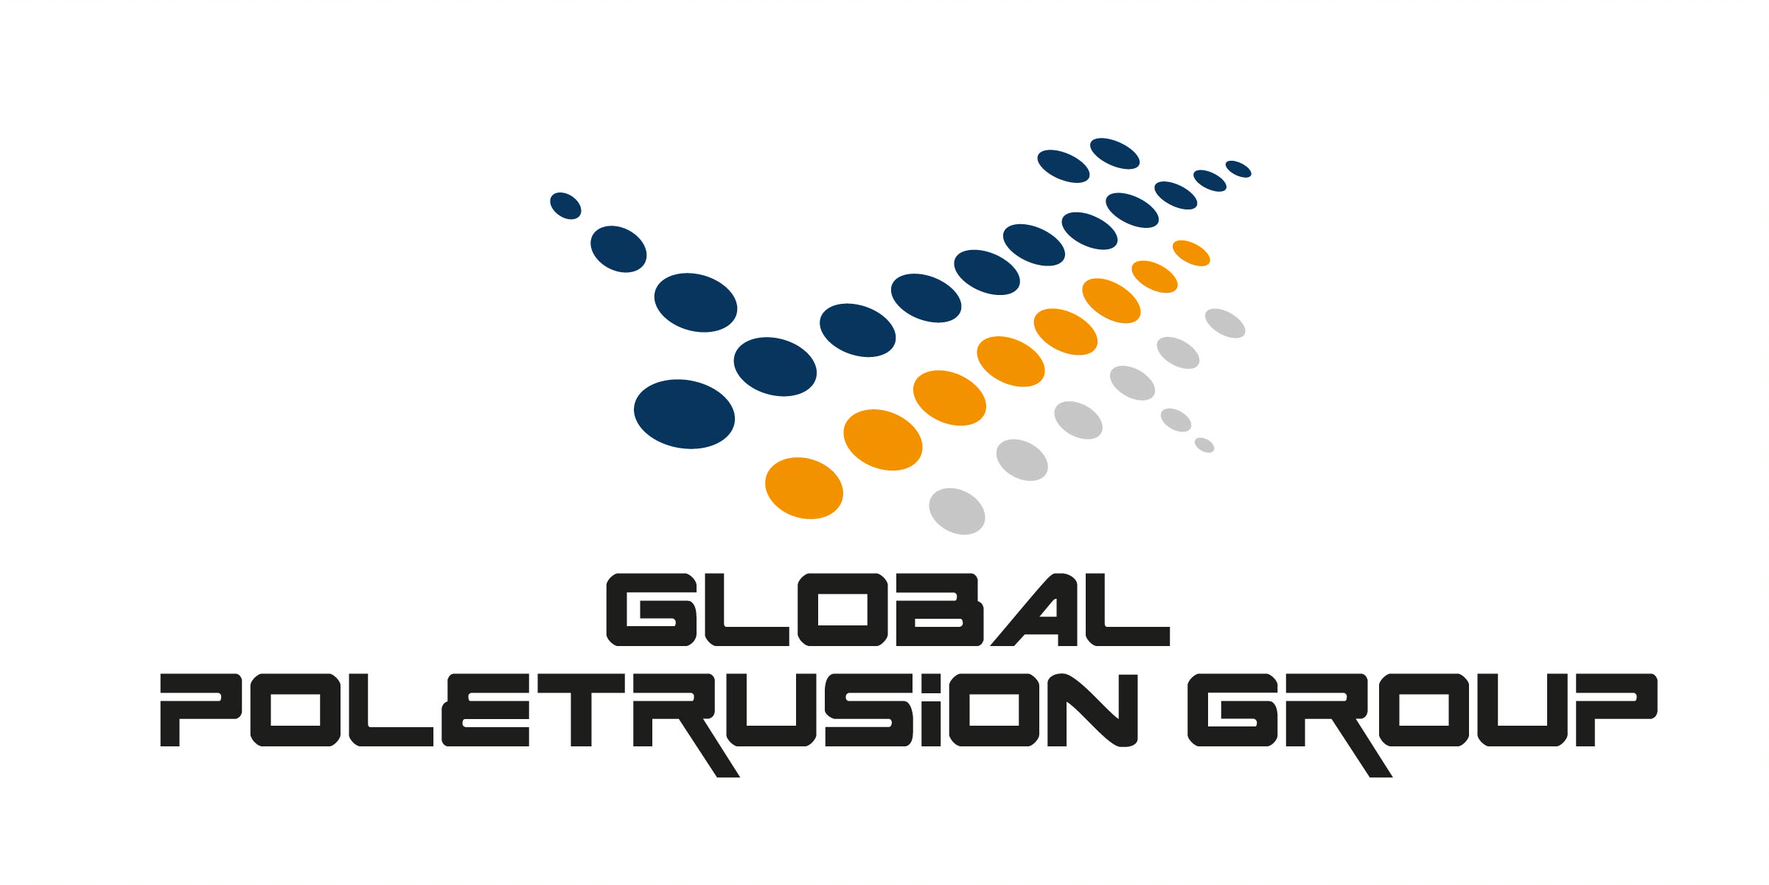 Global PoleTrusion Group Corp., Wednesday, March 27, 2019, Press release picture